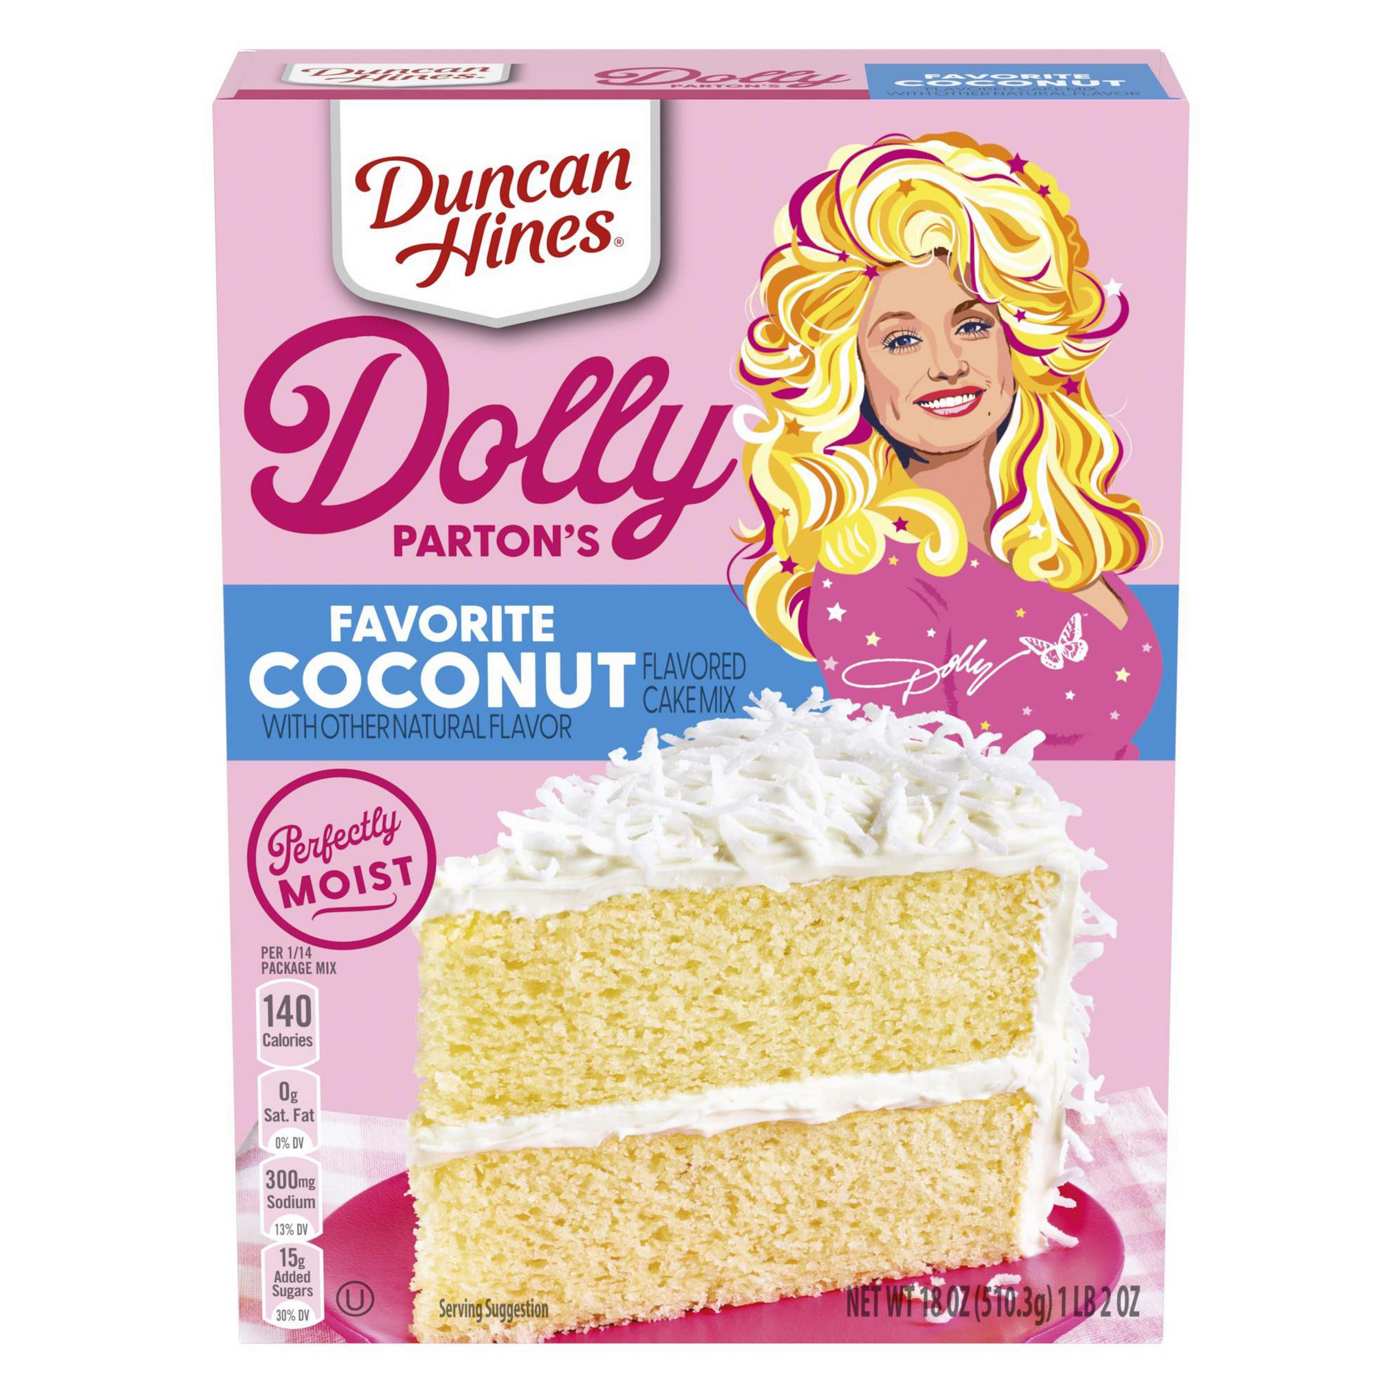 Duncan Hines Dolly Parton's Favorite Coconut Cake Mix; image 1 of 4